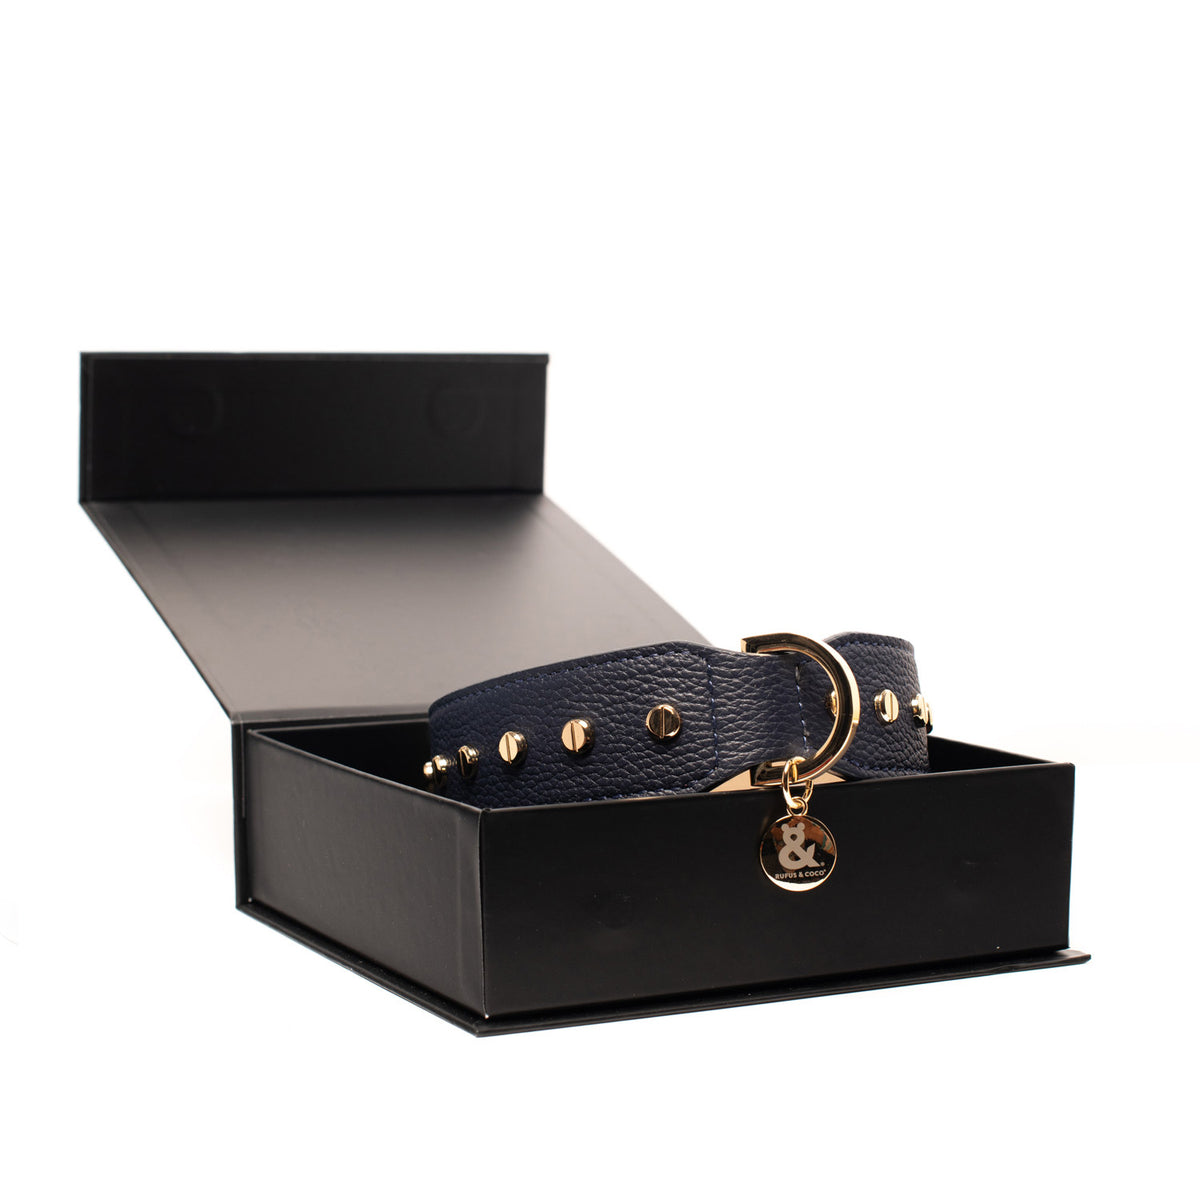 Rufus & Coco's Berlin Navy leather dog collar is made from 100% quality leather. Each collar is finished with premium gold hardware and studs for style and durability. The Navy leather dog collar is available in 4 sizes.